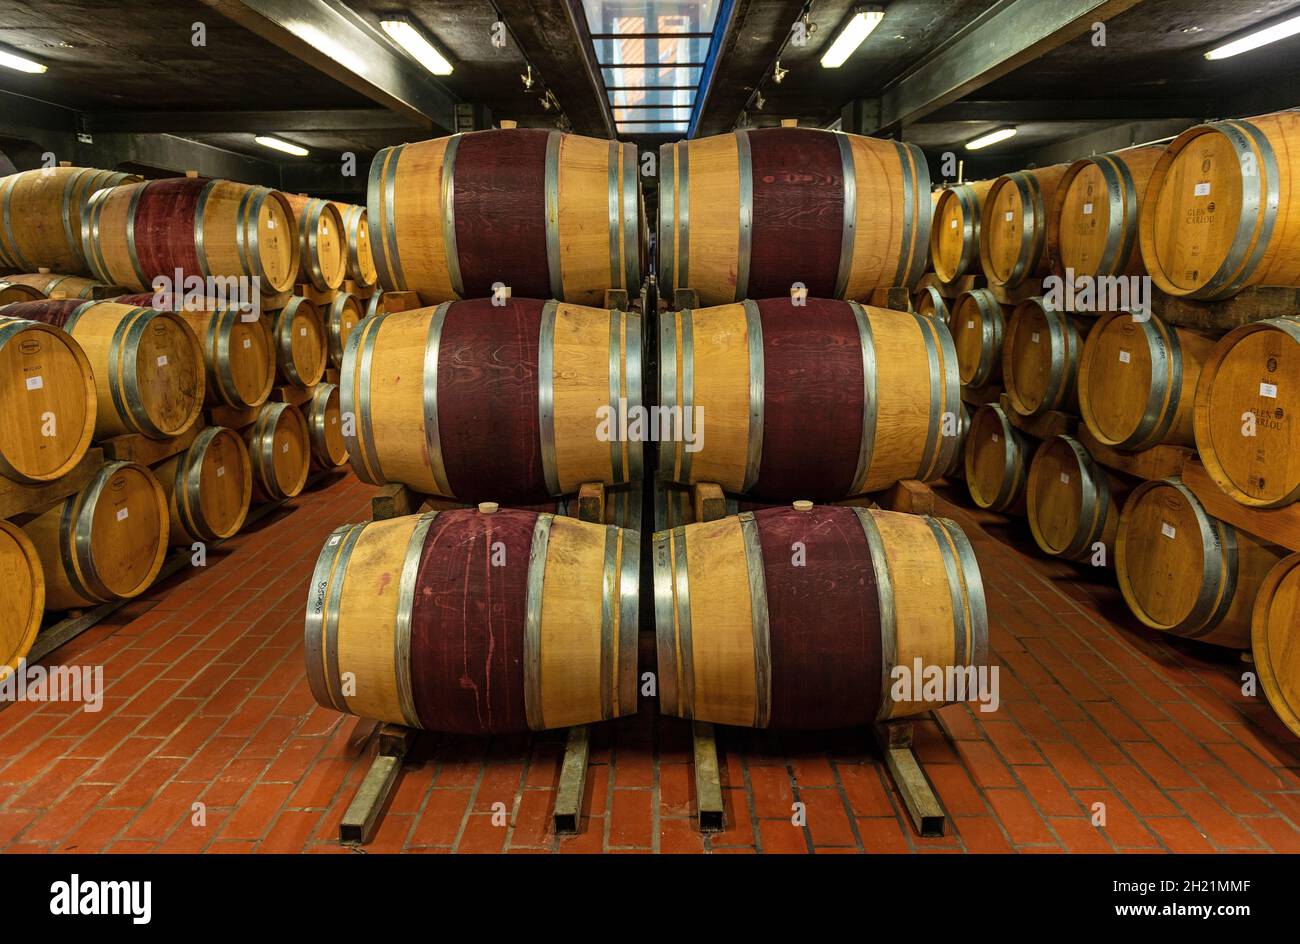 Wine aging in oak wooden casks in the cellar of a winery with vineyard, Stellenbosch, South Africa. Stock Photo